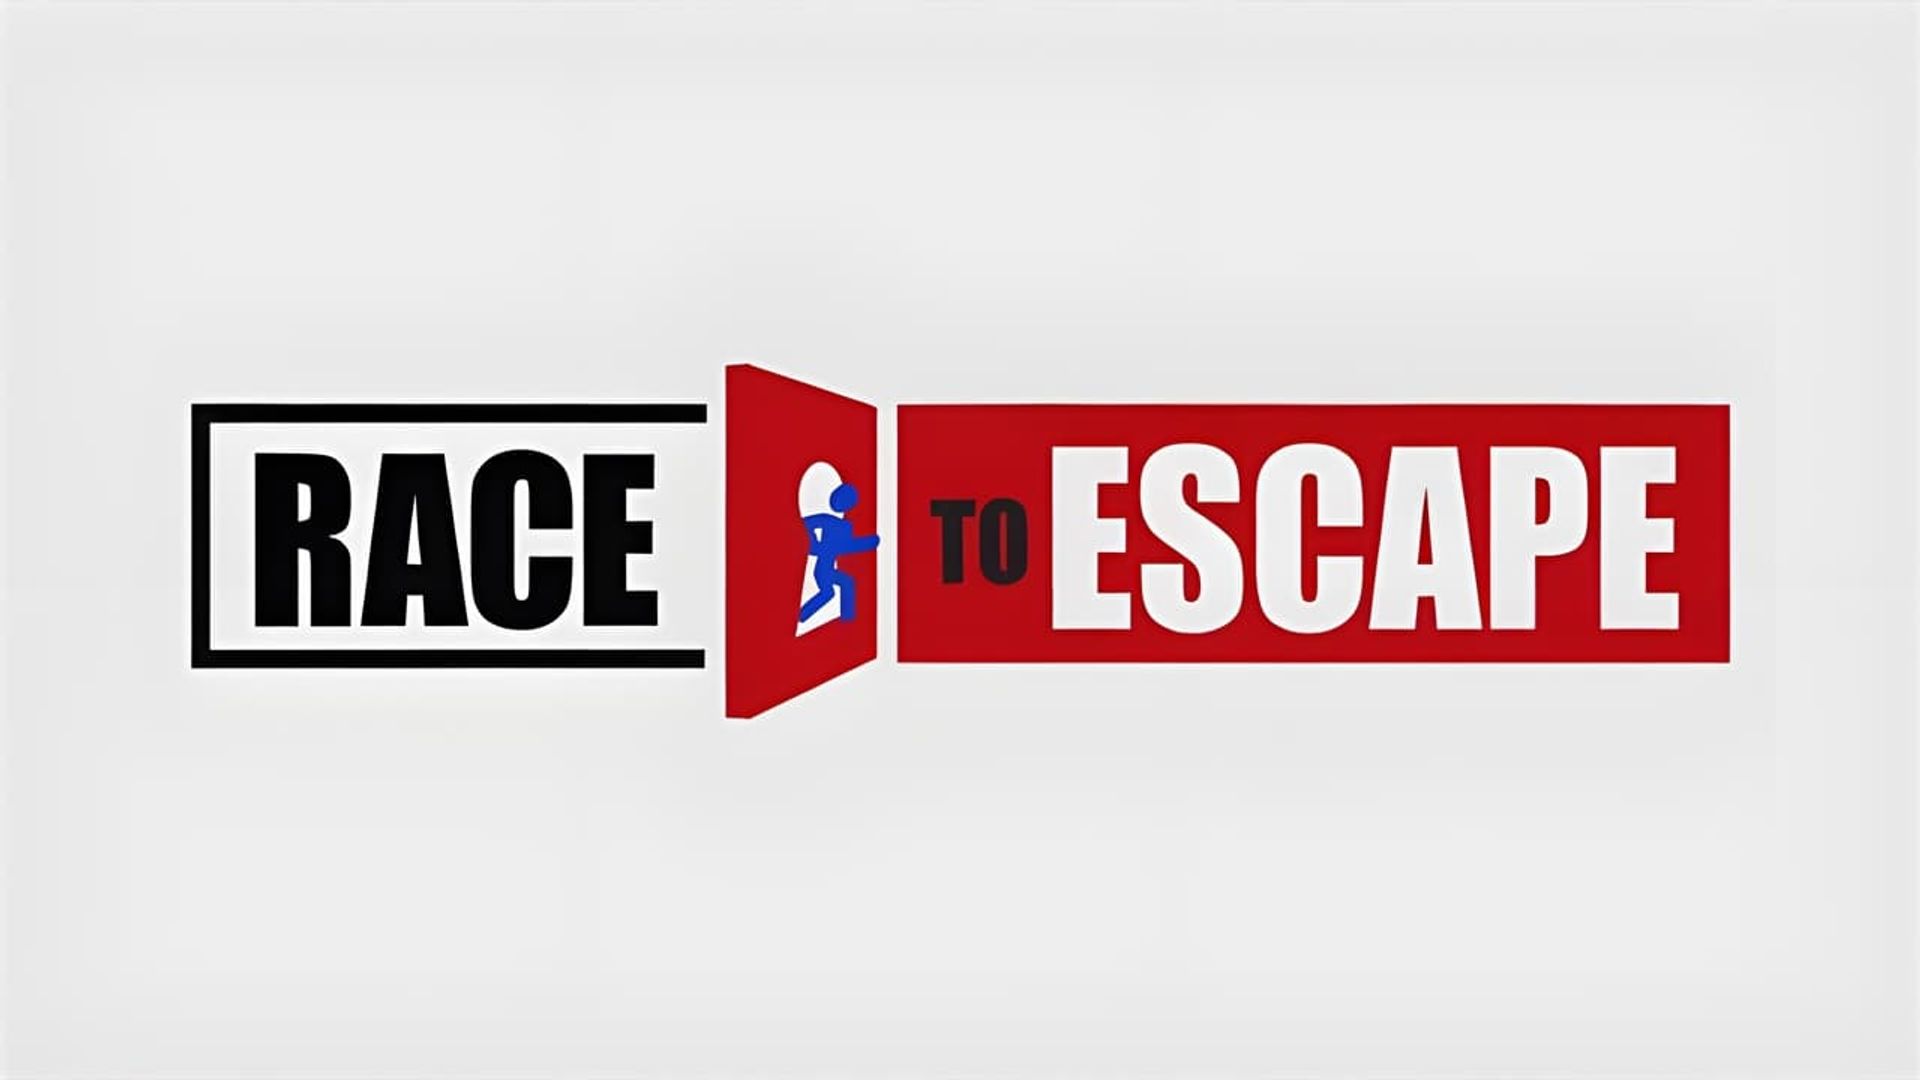 Race to Escape background